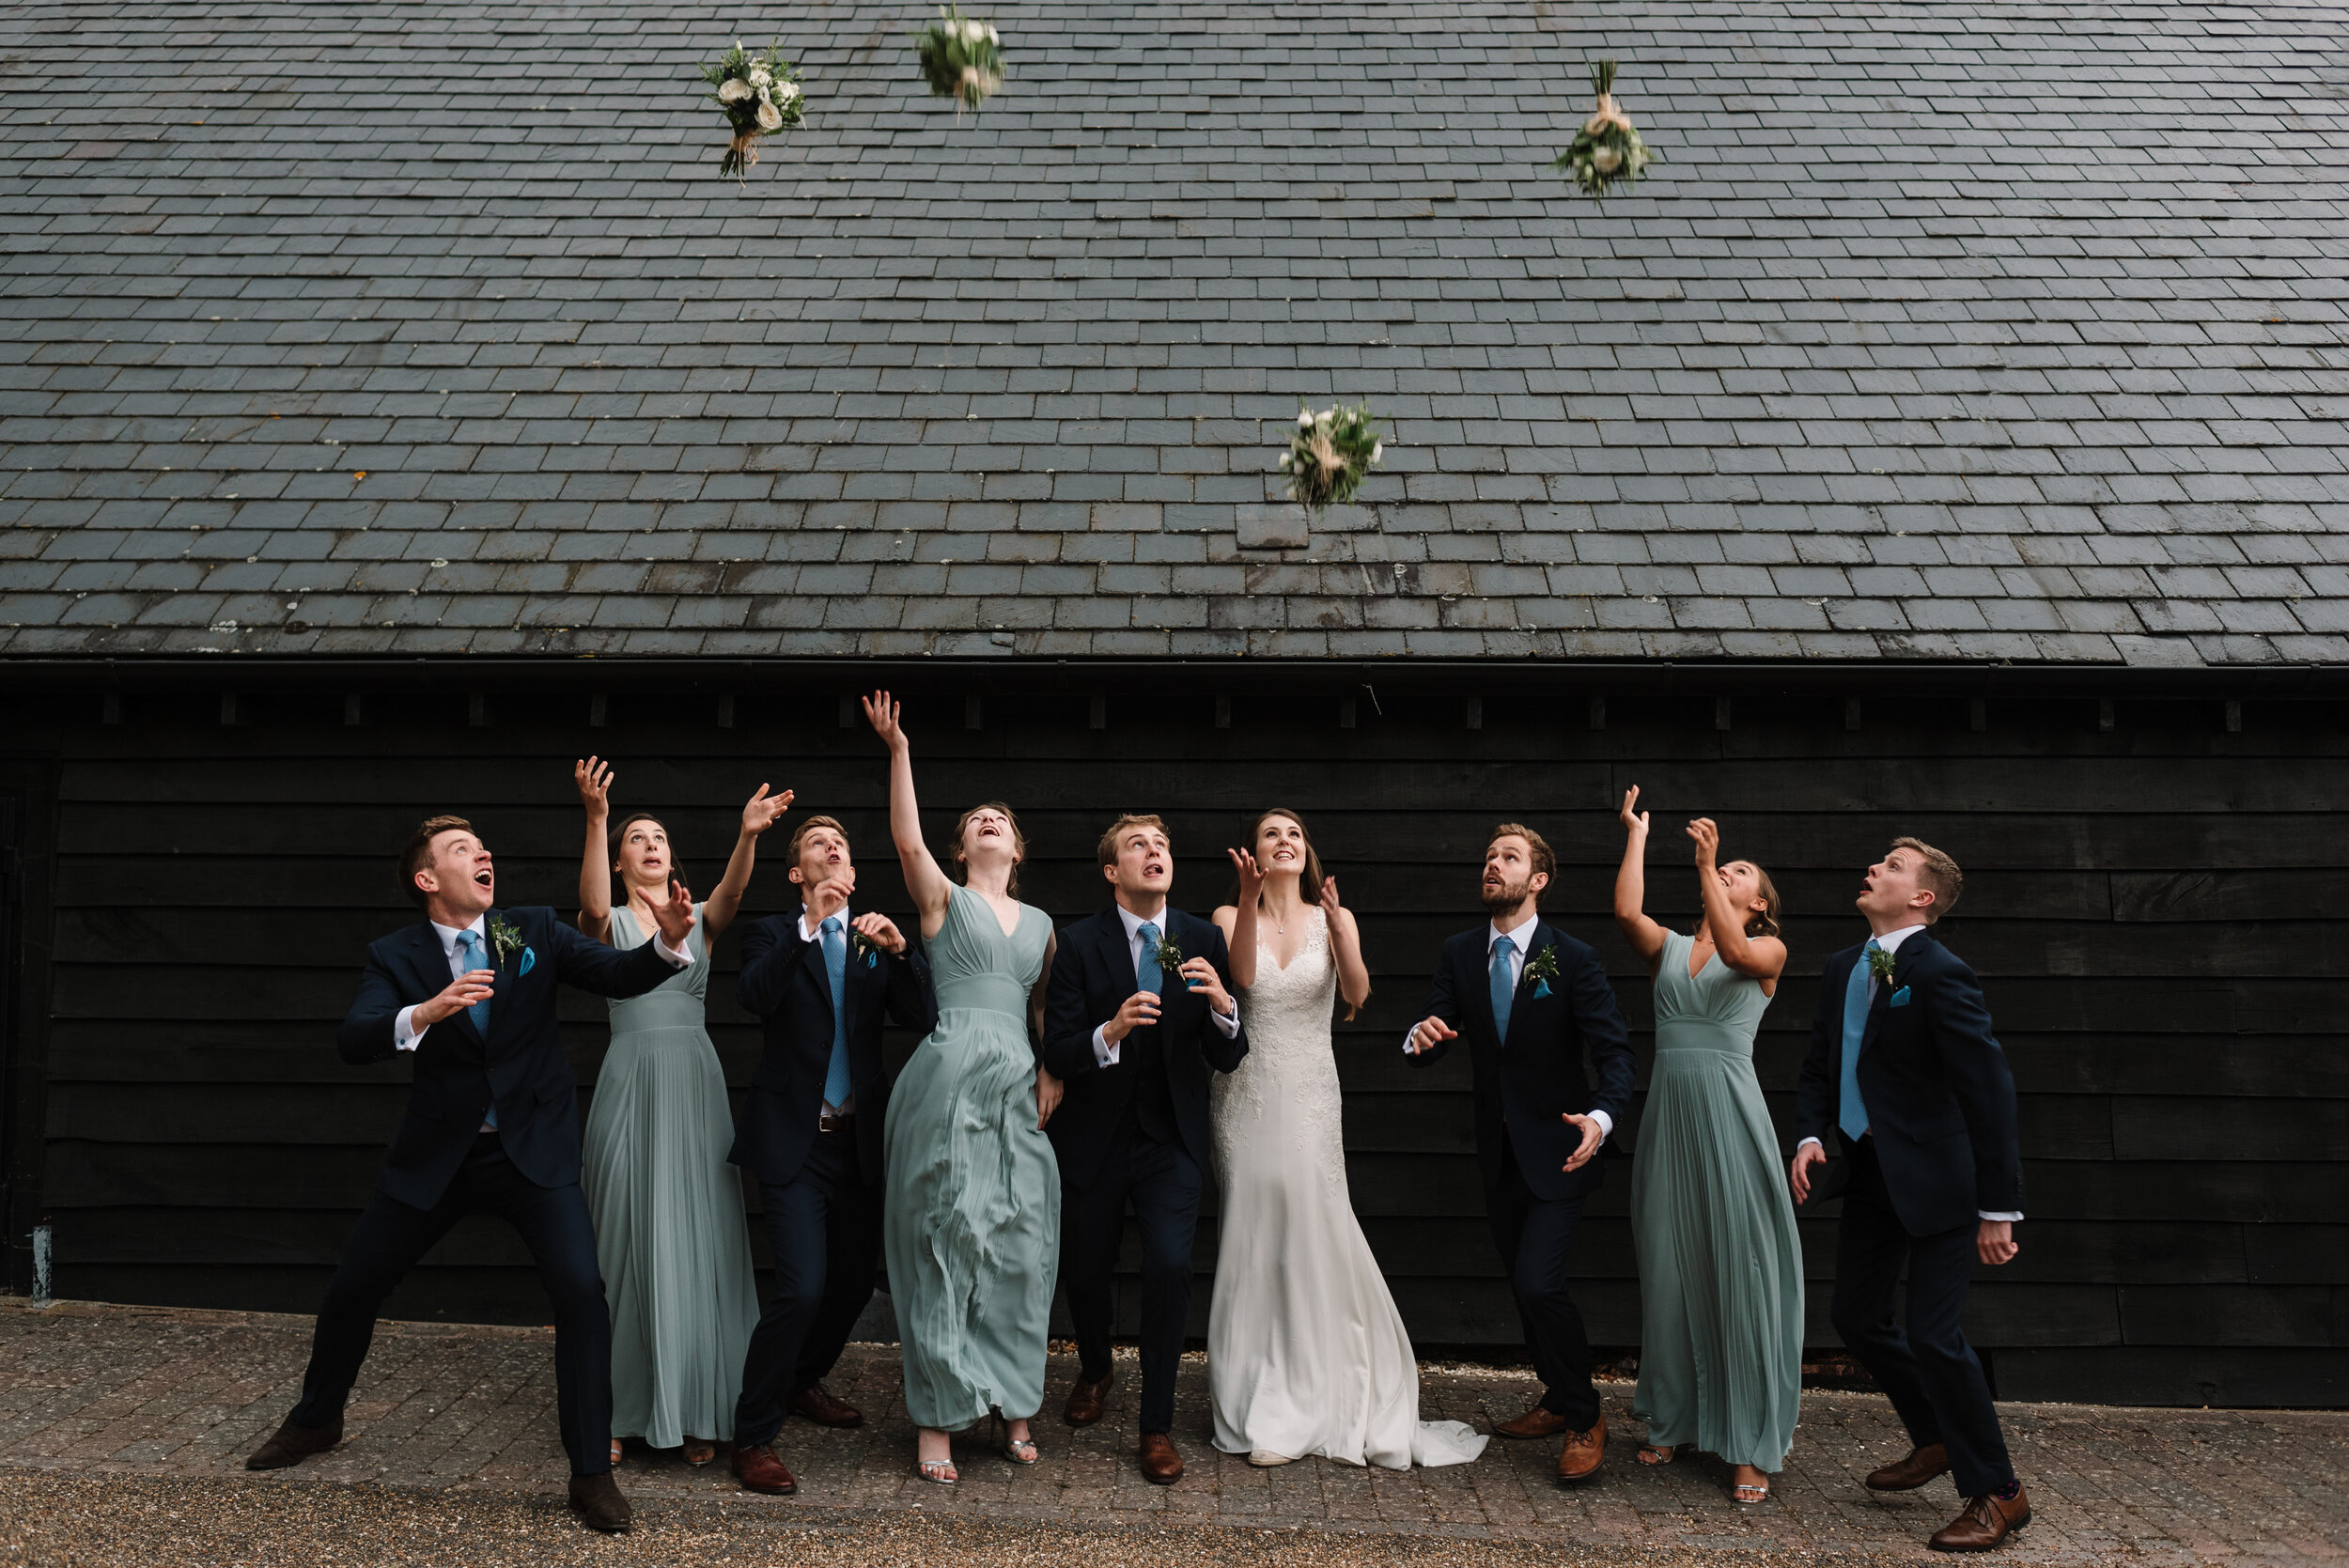 Bridesmaids throwing bouquets in the air for groomsmen to catch